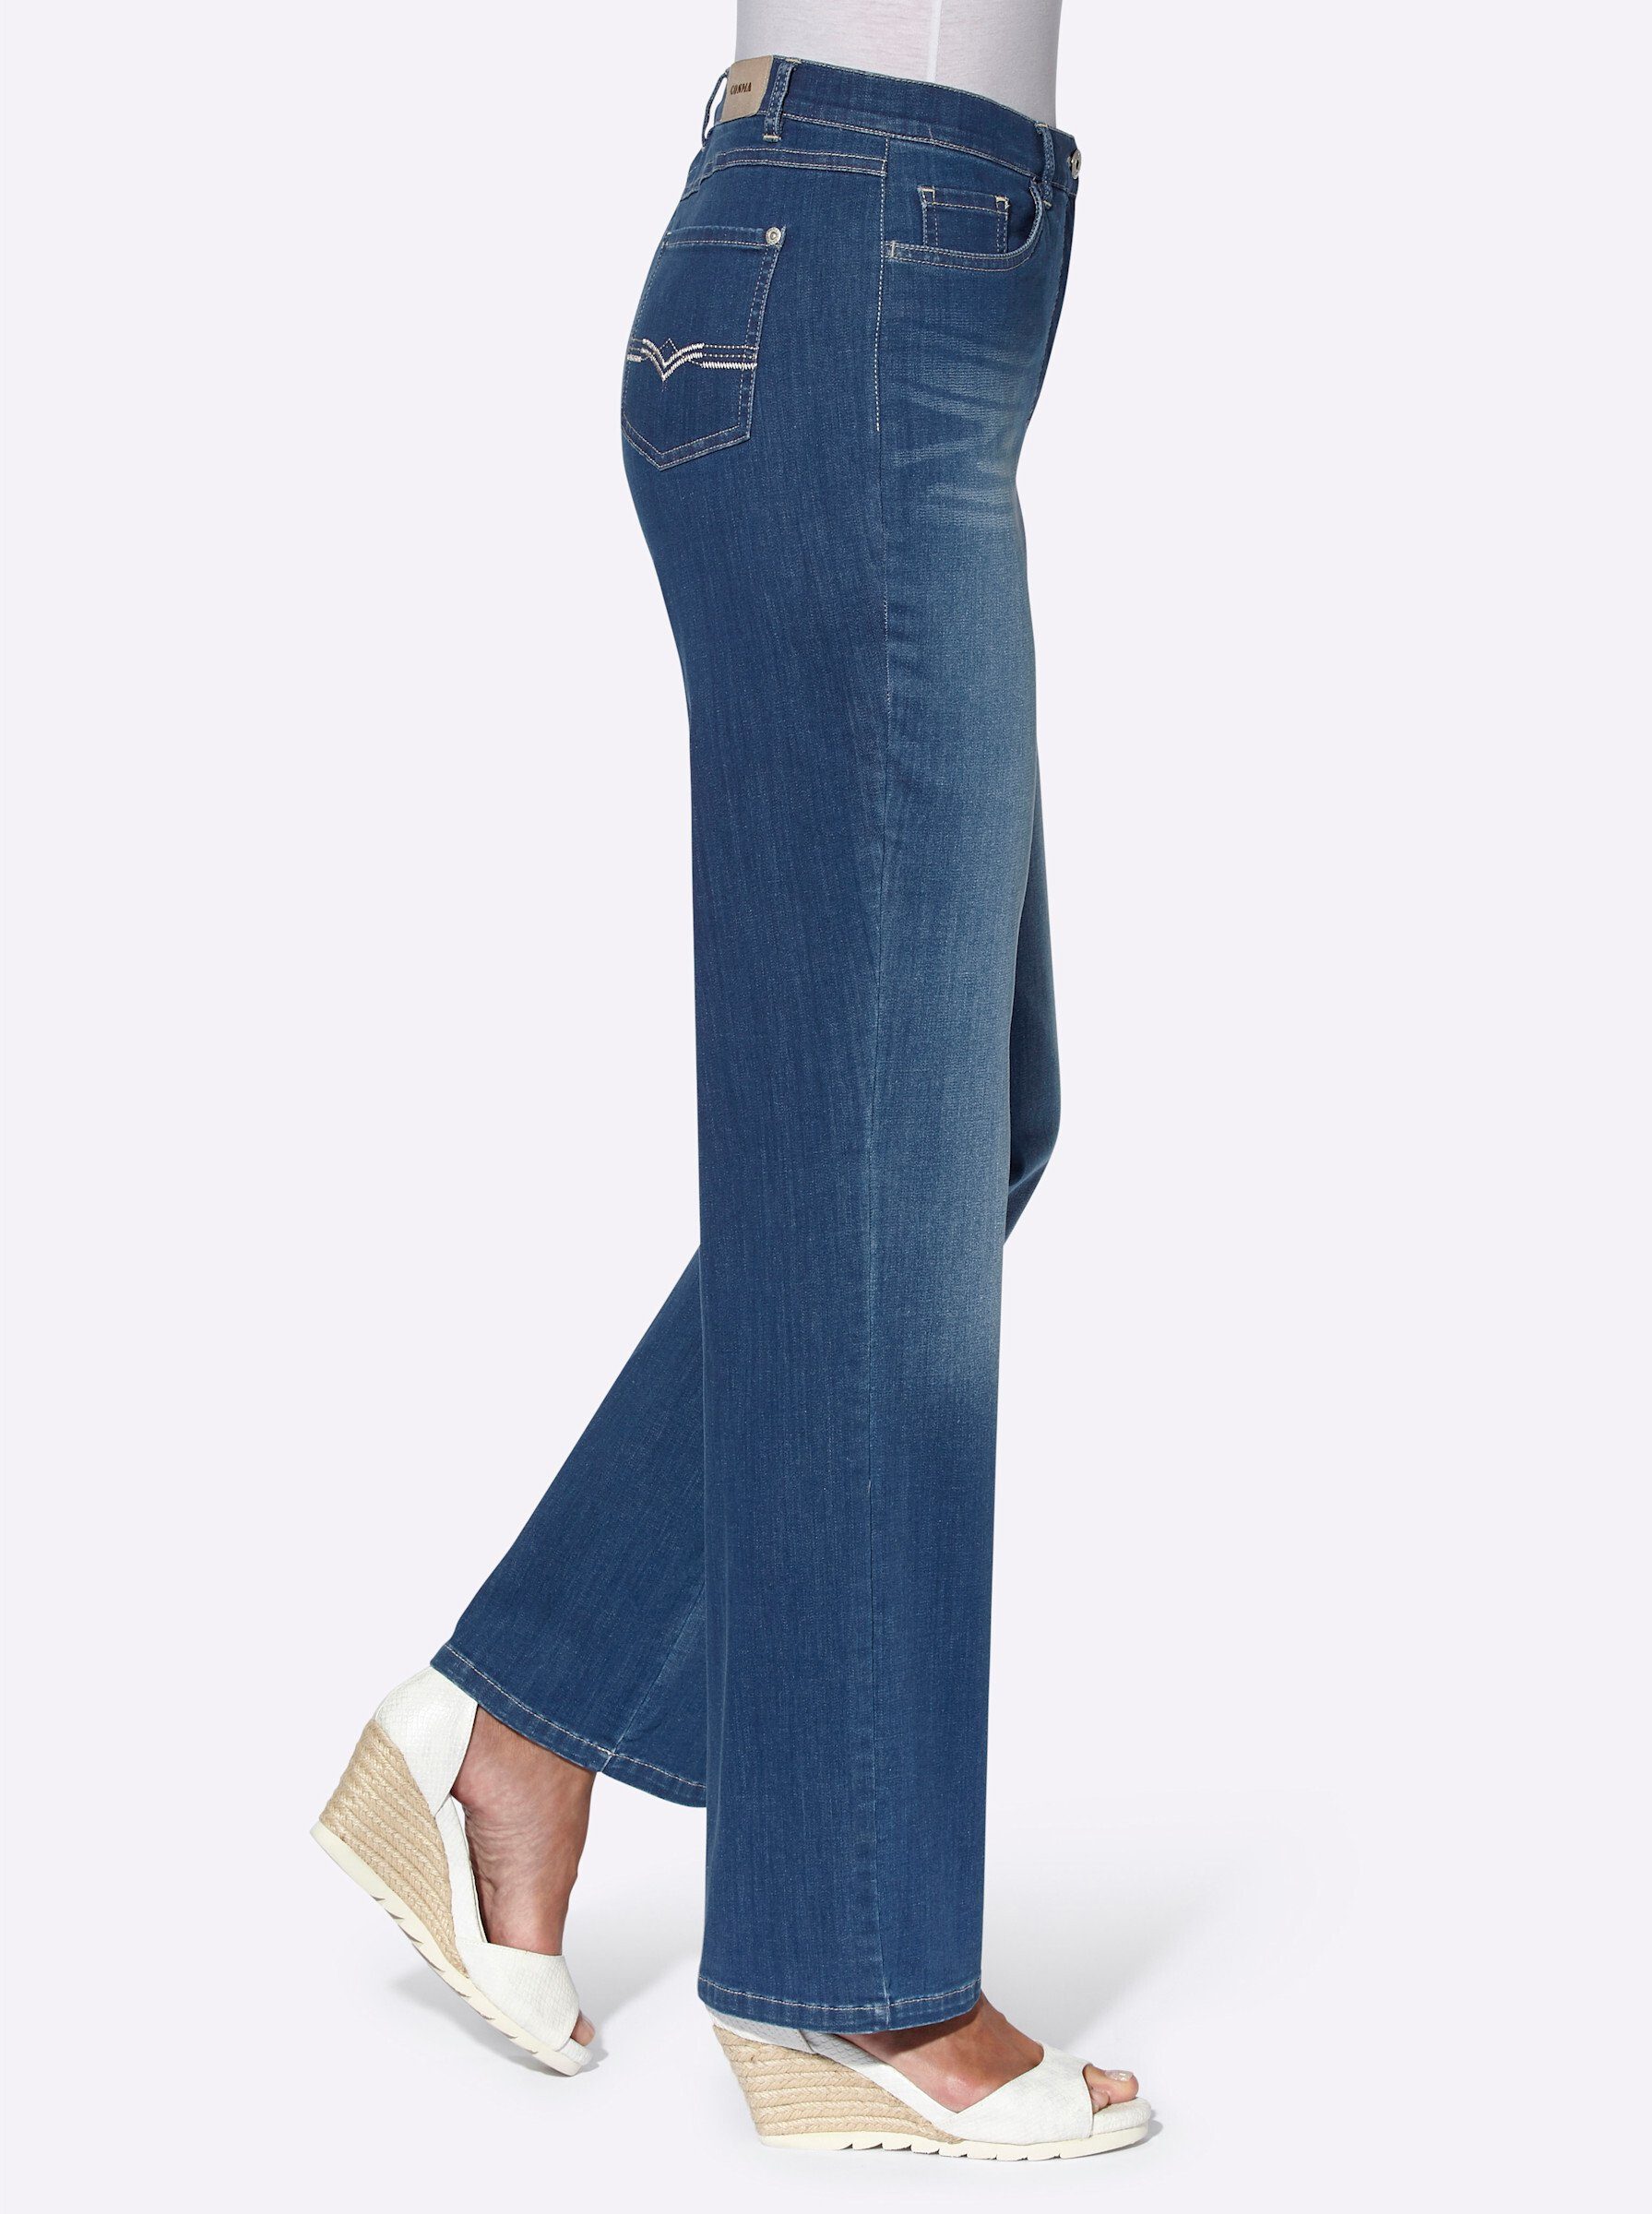 Jeans Cosma Bequeme blue-stone-washed